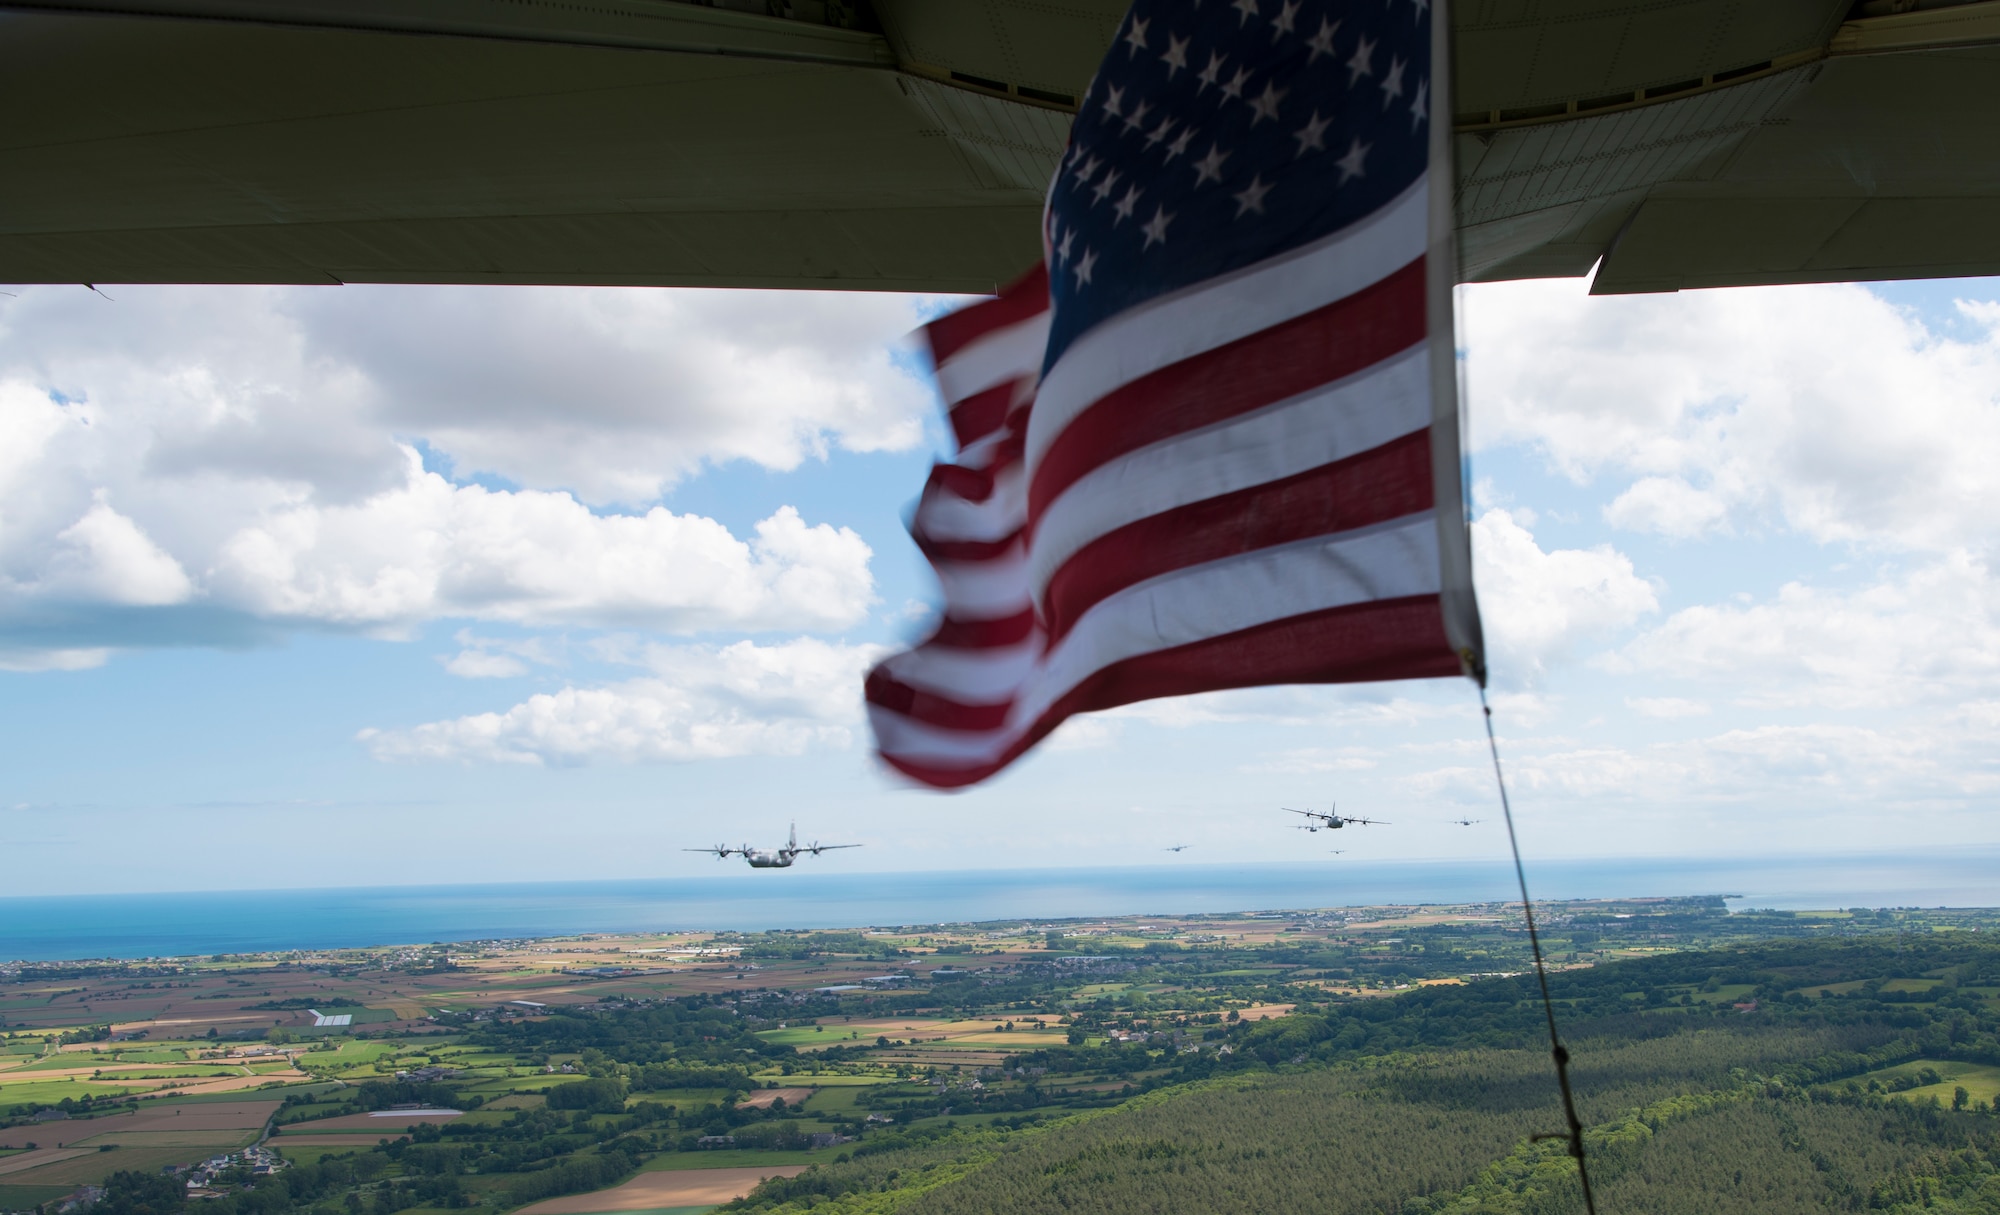 The American flag, secured to the open ramp of the lead 37th Airlift Squadron C-130J Super Hercules, waves in the wind, as seven C-130J Super Hercules tail behind as part of an eight-ship formation in Normandy, France, June 6, 2019. The eight-ship formation flyover was part of the commemoration events in honor of the 75th anniversary of D-Day. In this formation, four C-130J Super Hercules belong to the 37th AS out of Ramstein Air Base, two belonging to the 61st and 62nd AS out of Little Rock Air Force Base, and two belonging to the 39th and 40th AS out of Dyess Air Force Base. (U.S. Air Force photo by Senior Airman Kristof J. Rixmann)